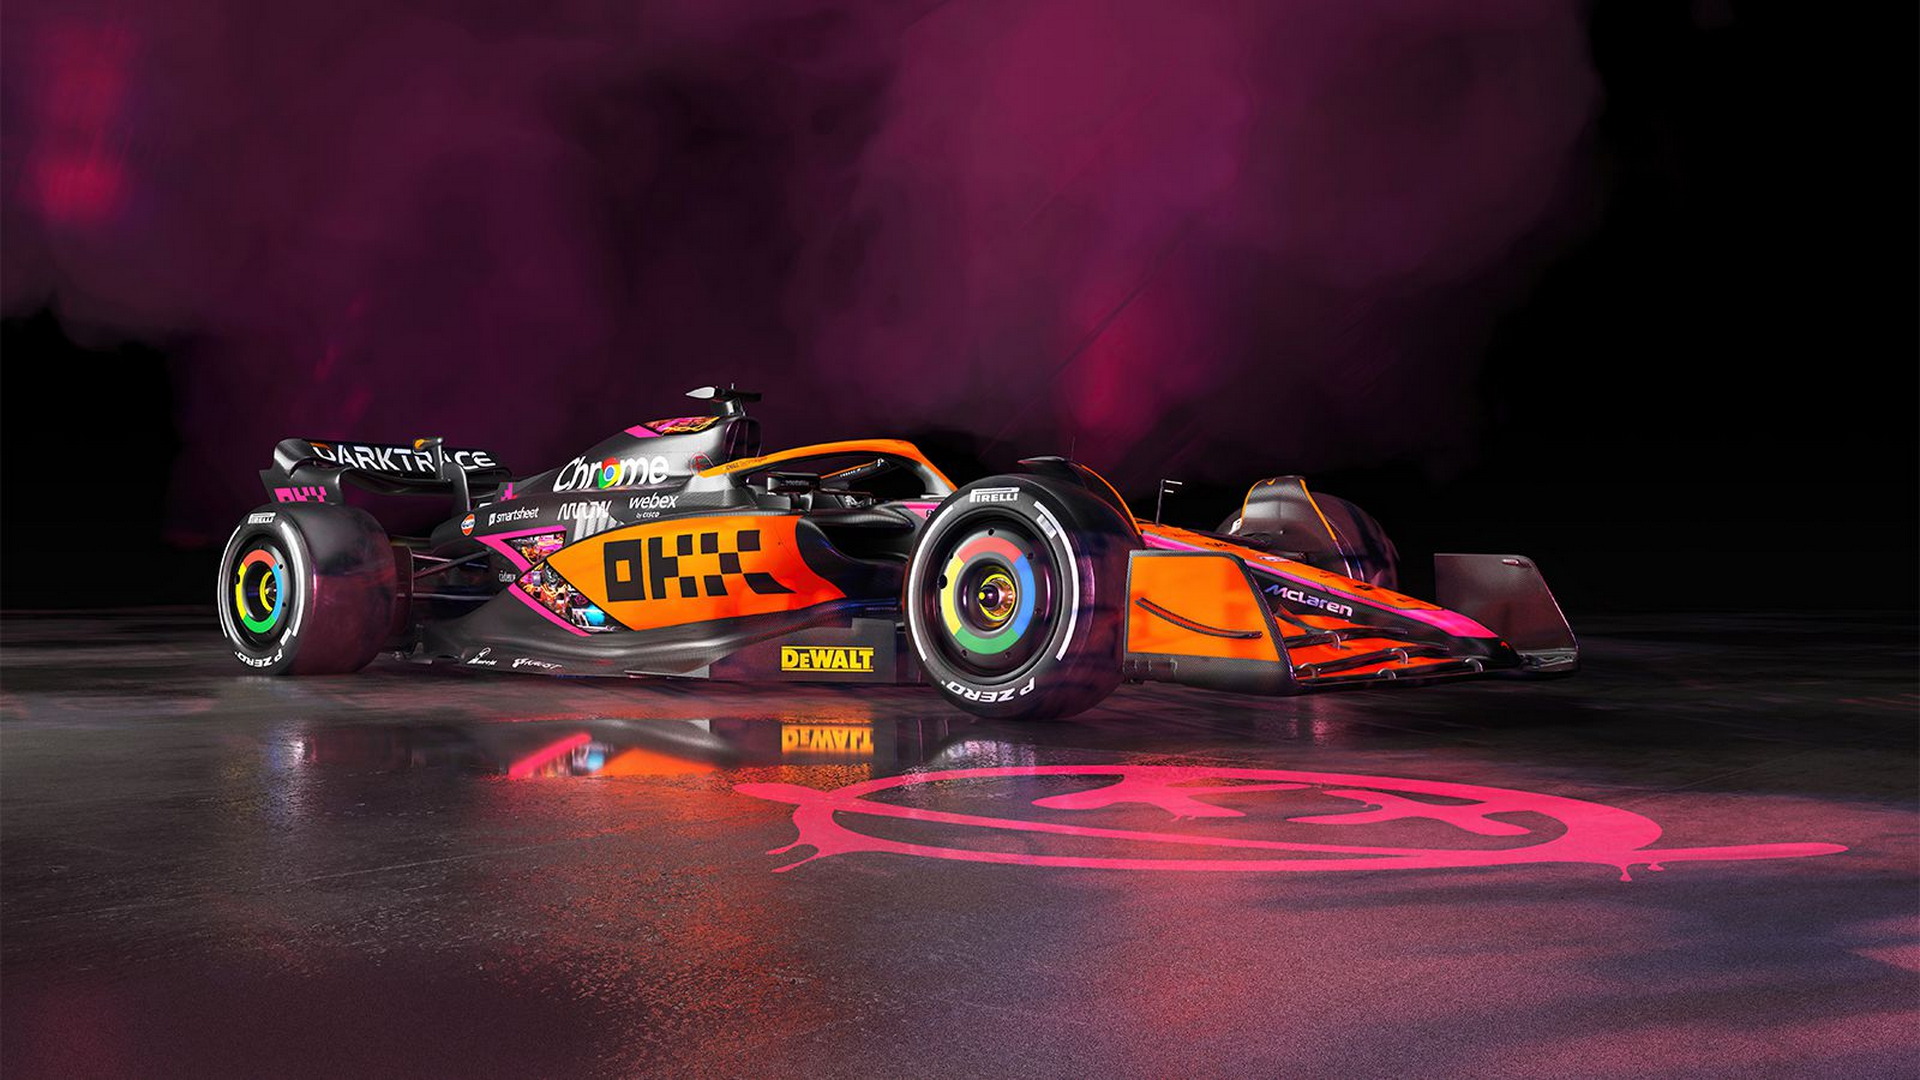 McLaren F1 Debuts Special Livery Celebrating Their Return To Racing In Asia